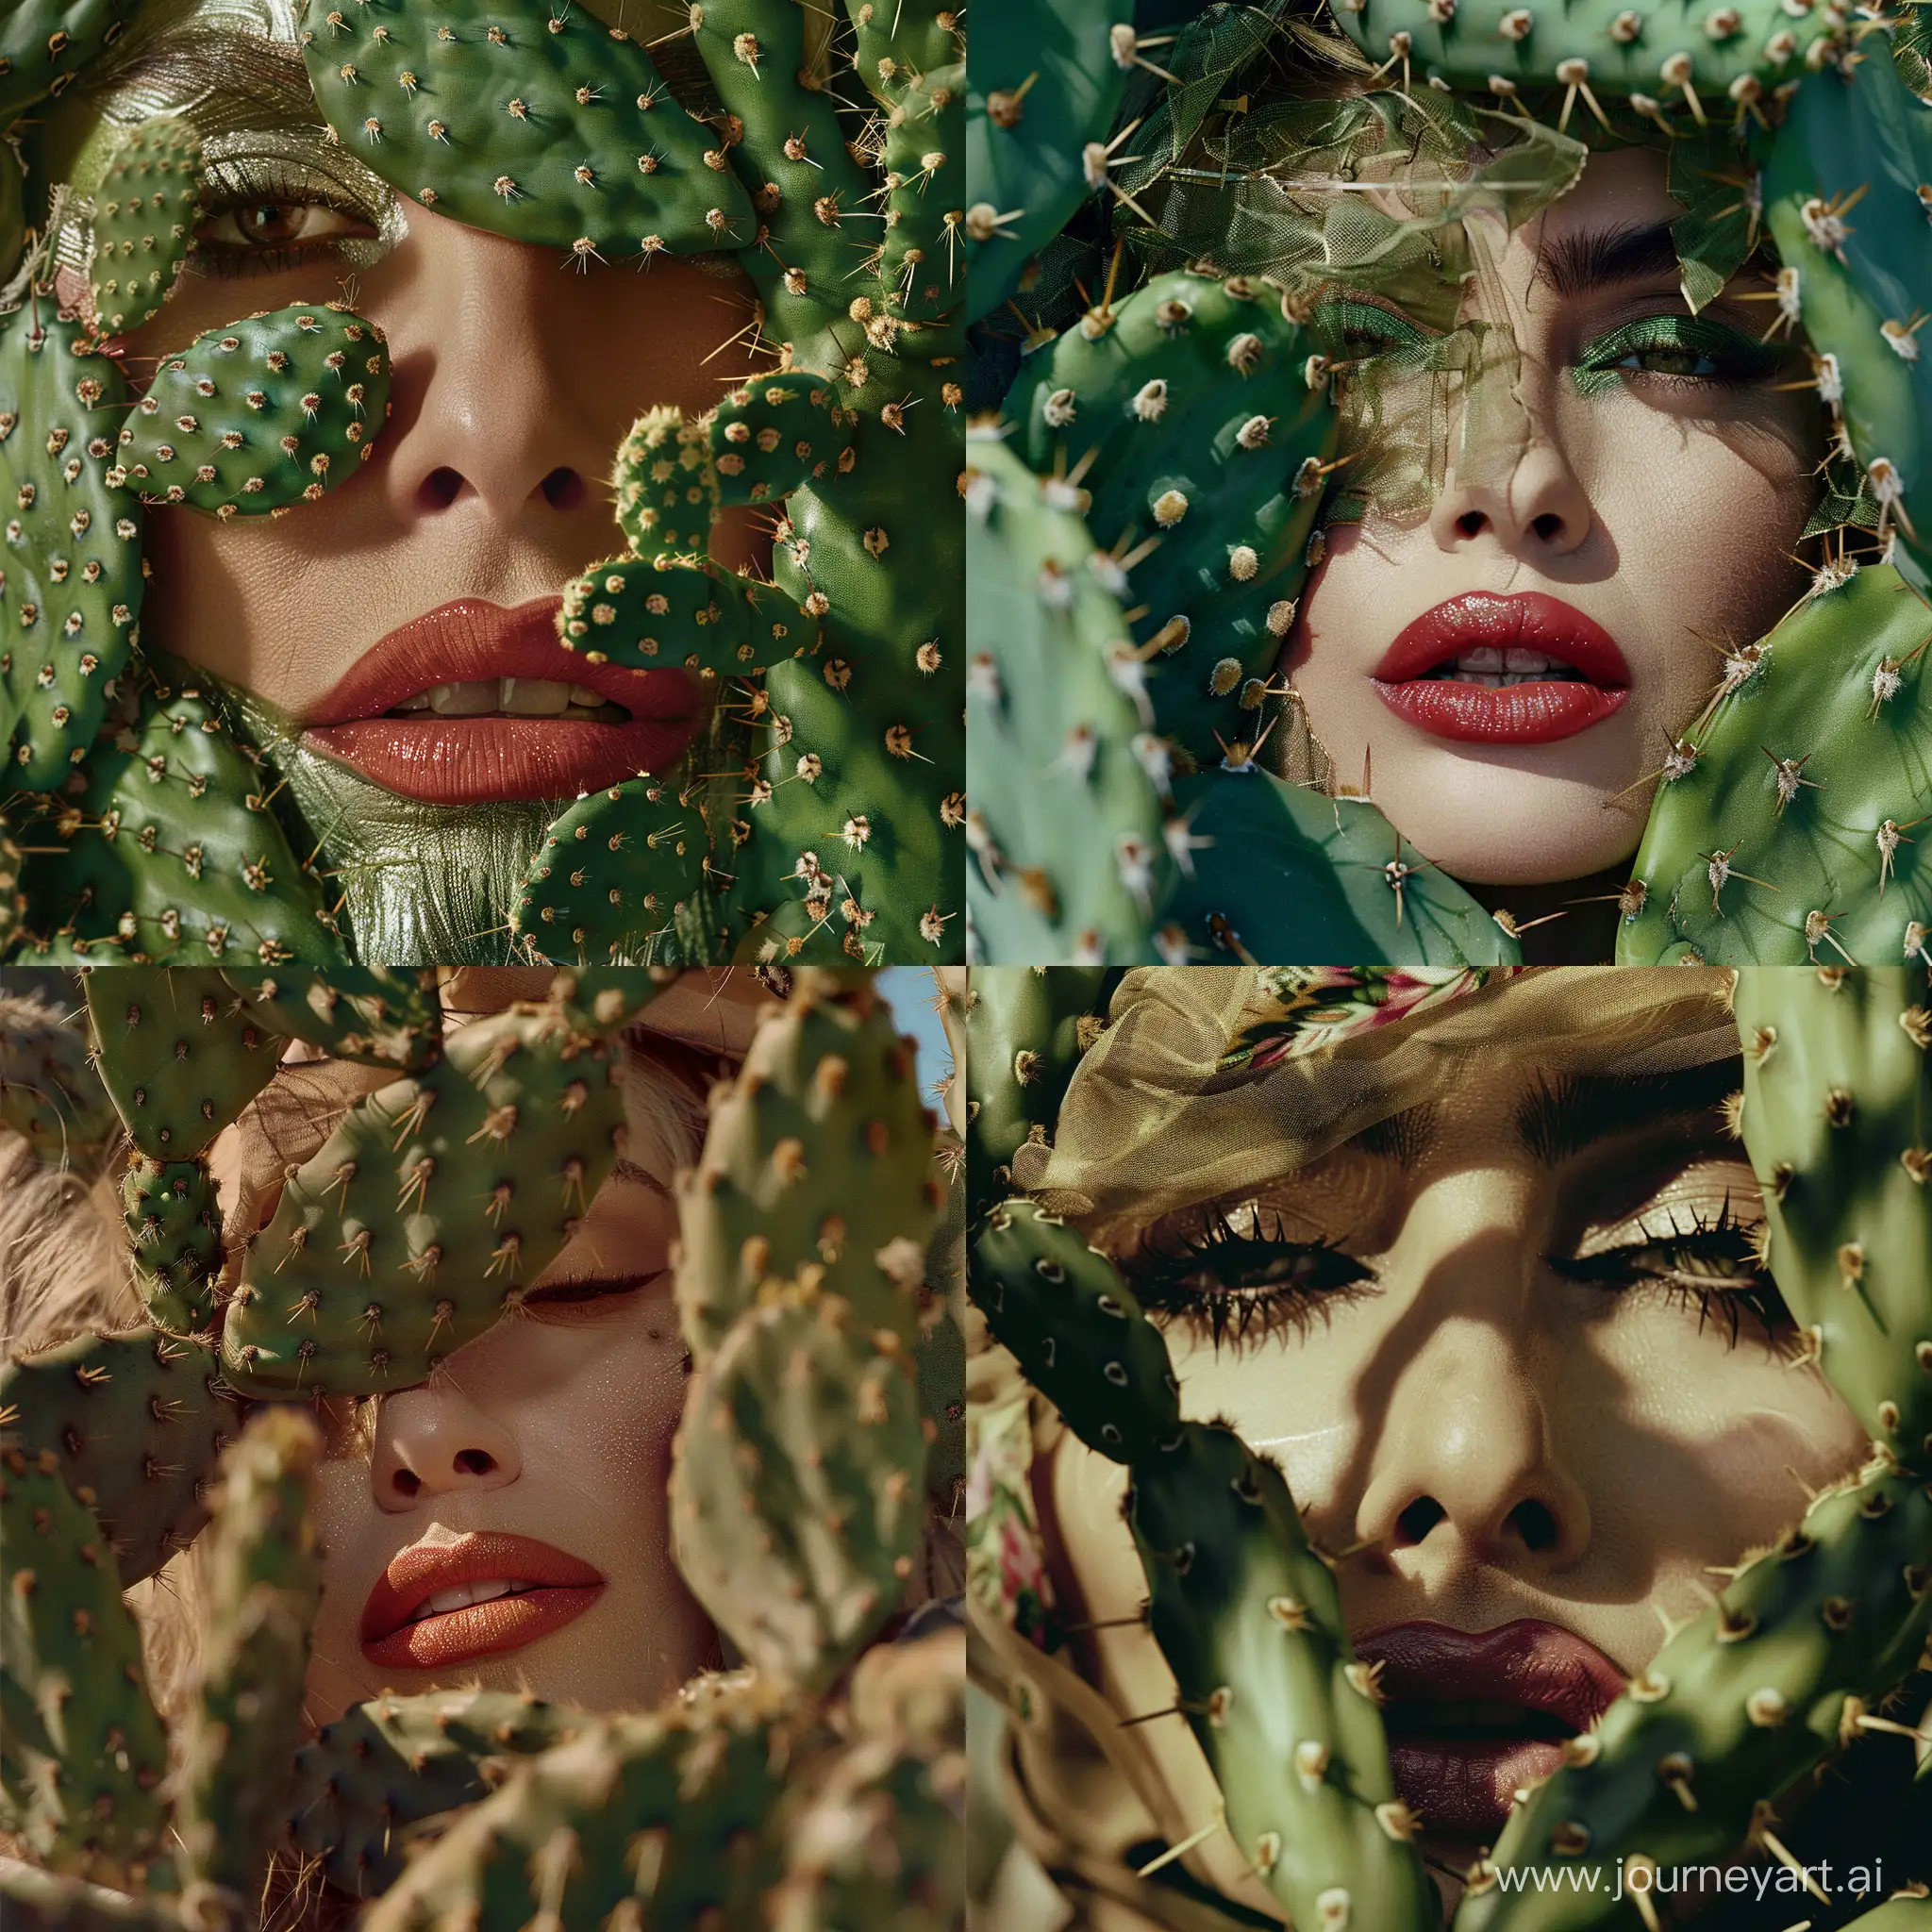 Modern-Bedouin-Madonna-CloseUp-Portrait-with-Cacti-and-90s-Aesthetic